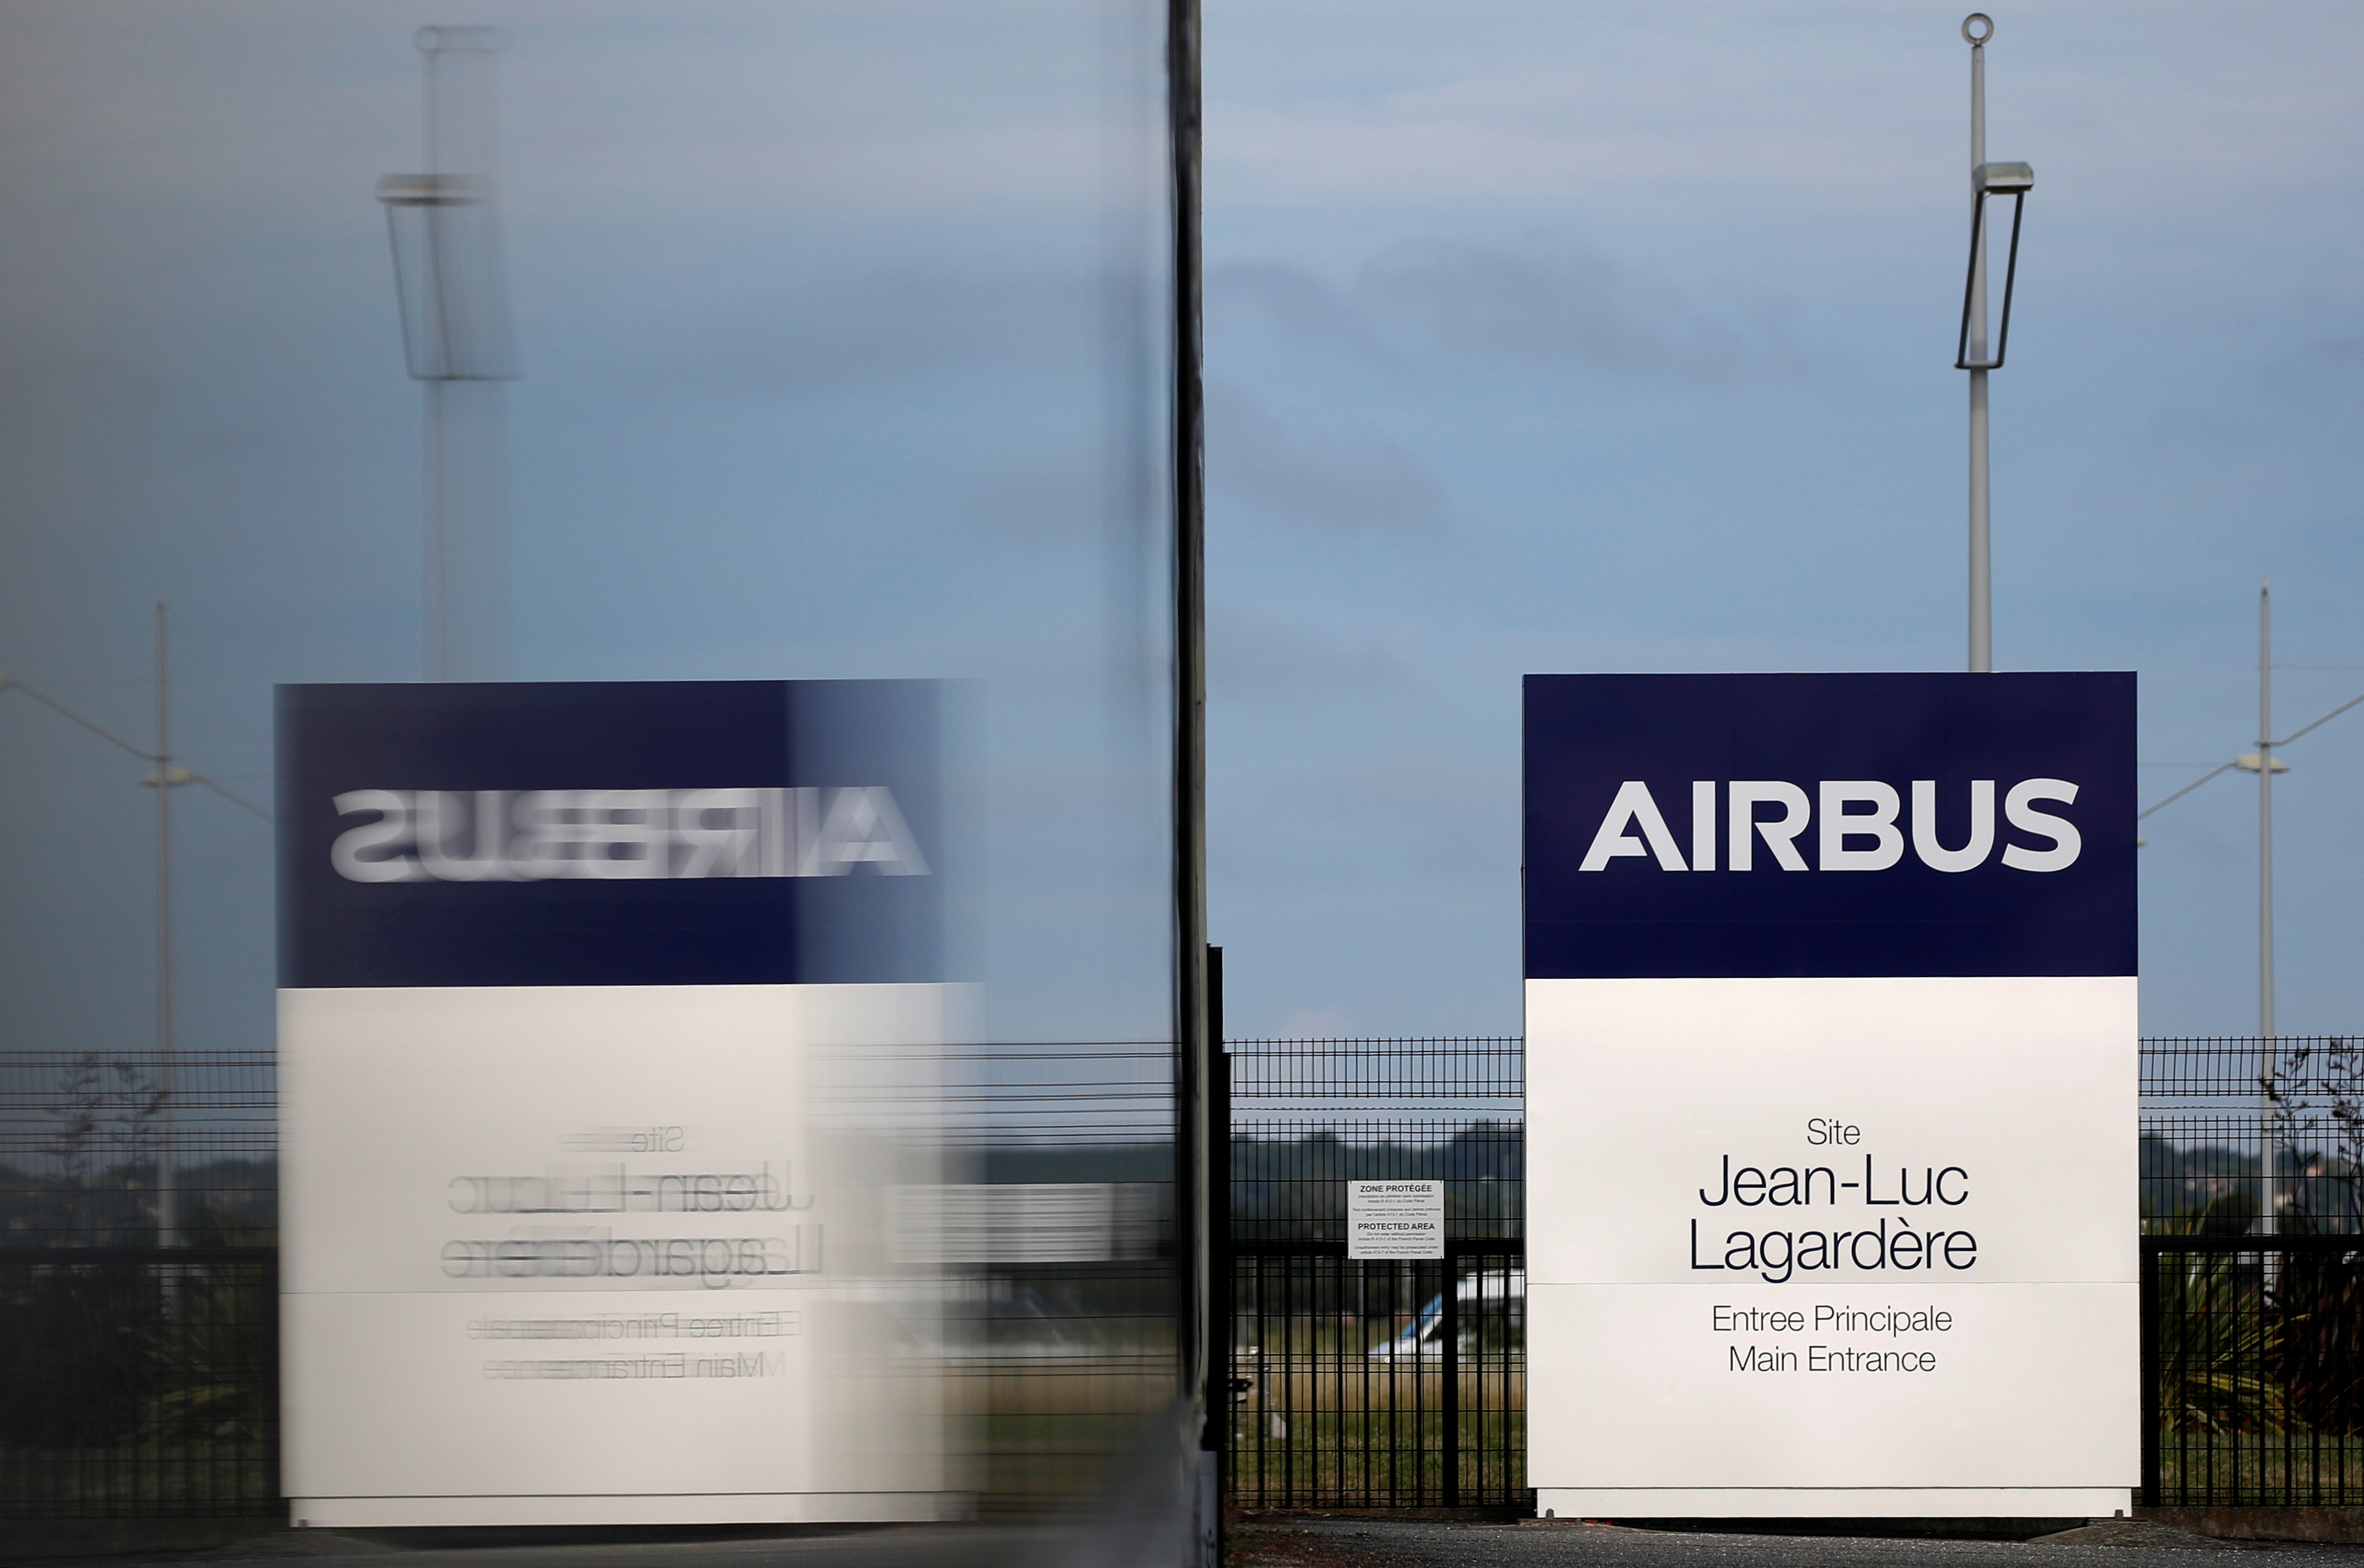 A logo of Airbus is seen at the entrance of the Jean-Luc Lagardere A380 production plant at Airbus headquarters in Blagnac, near Toulouse, France June 18, 2020. Picture taken June 18, 2020. REUTERS/Stephane Mahe